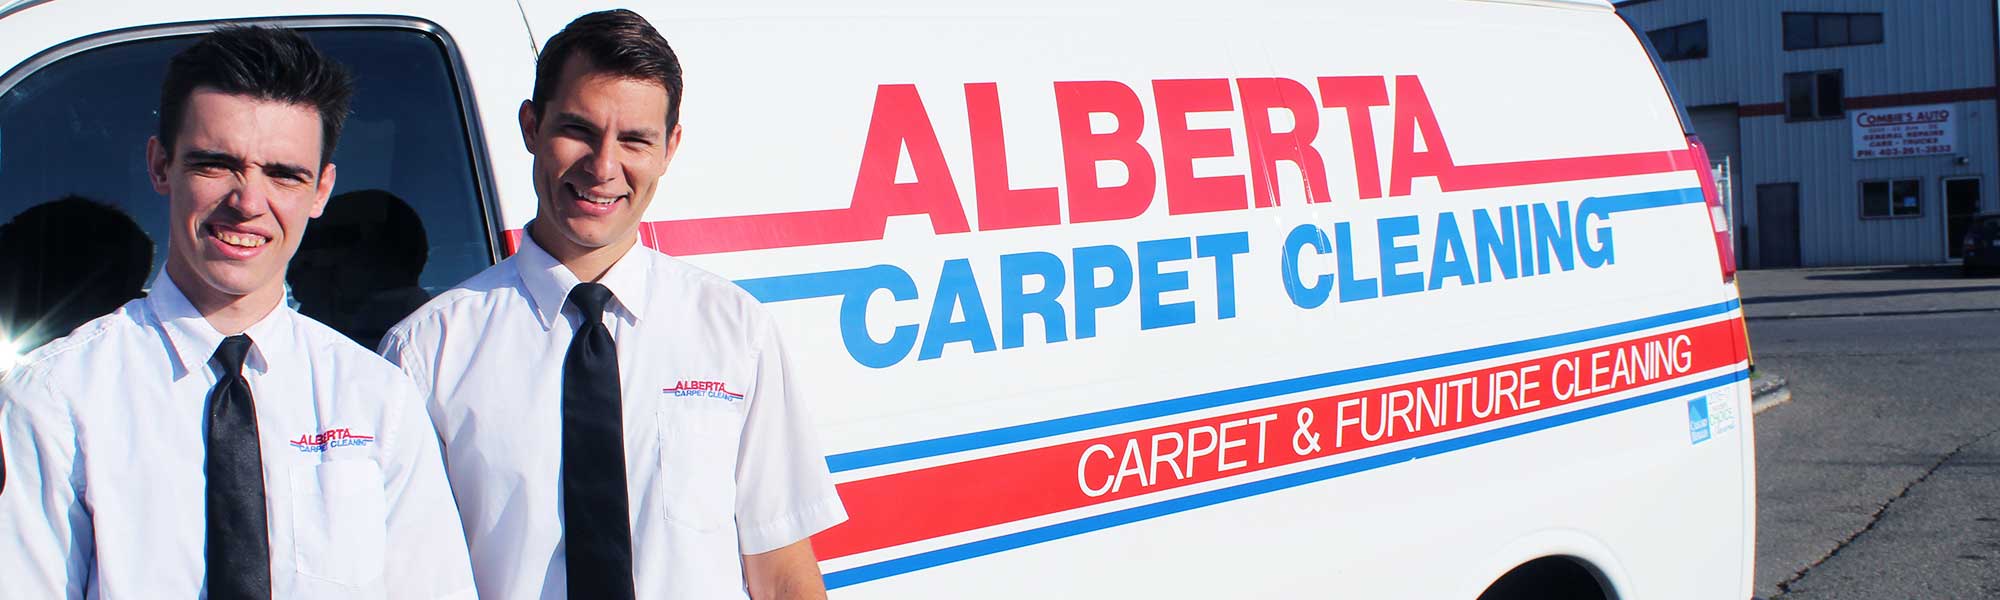 Two professionals standing before a Van featuring Calgary's Alberta Carpet Cleaning services.